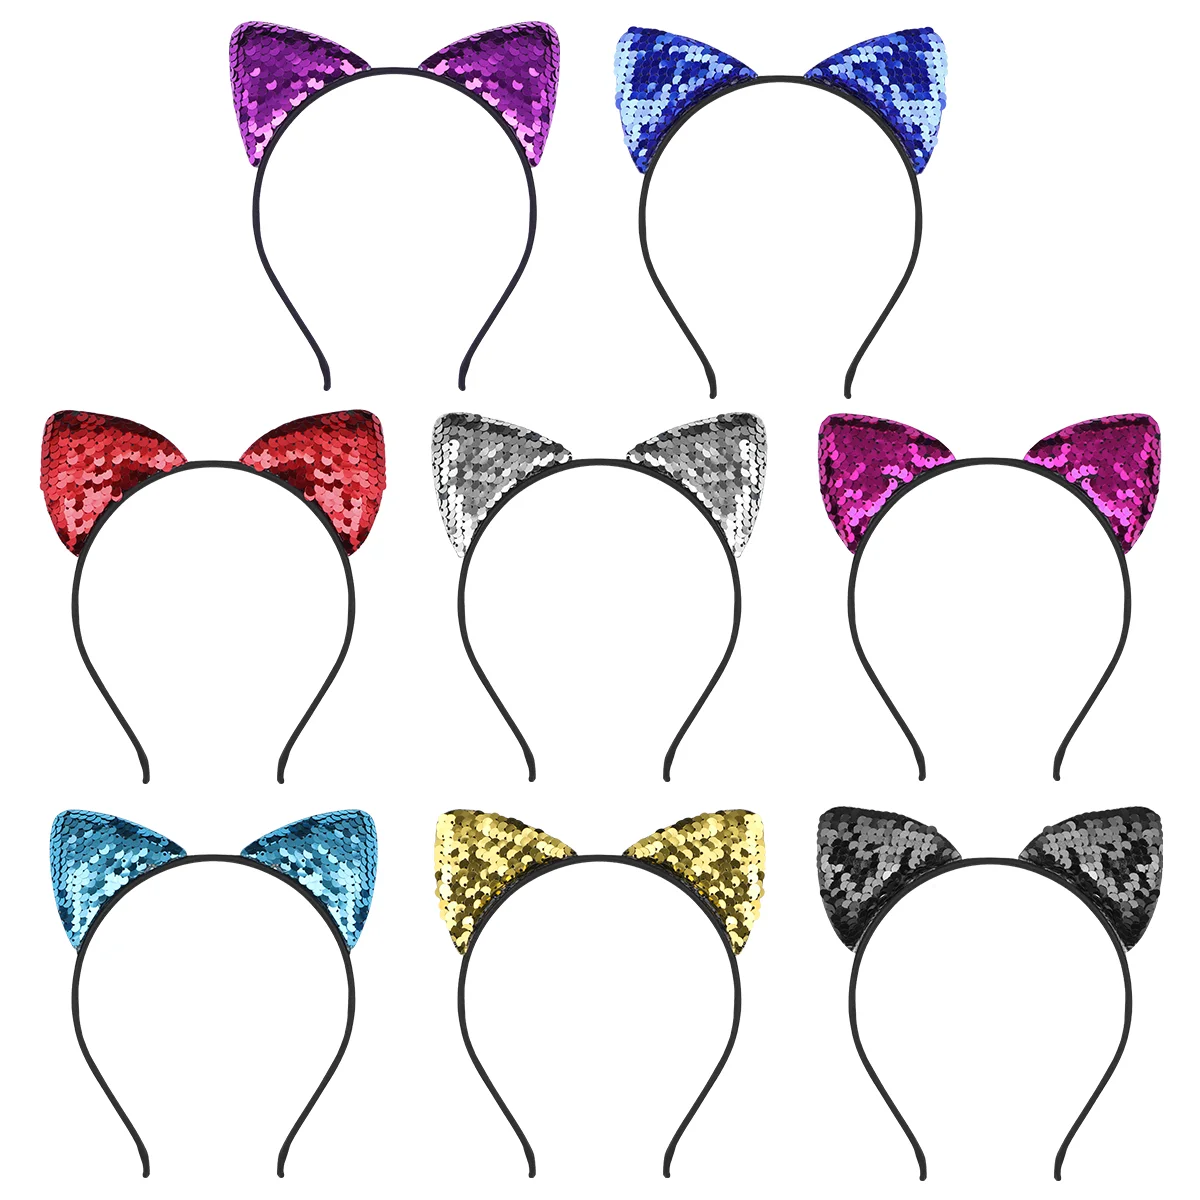 

Frcolor 8pcs Sequin Cat Ears Headband Shiny Hair Hoops Bling Hairband Hair Accessories for Women Girls